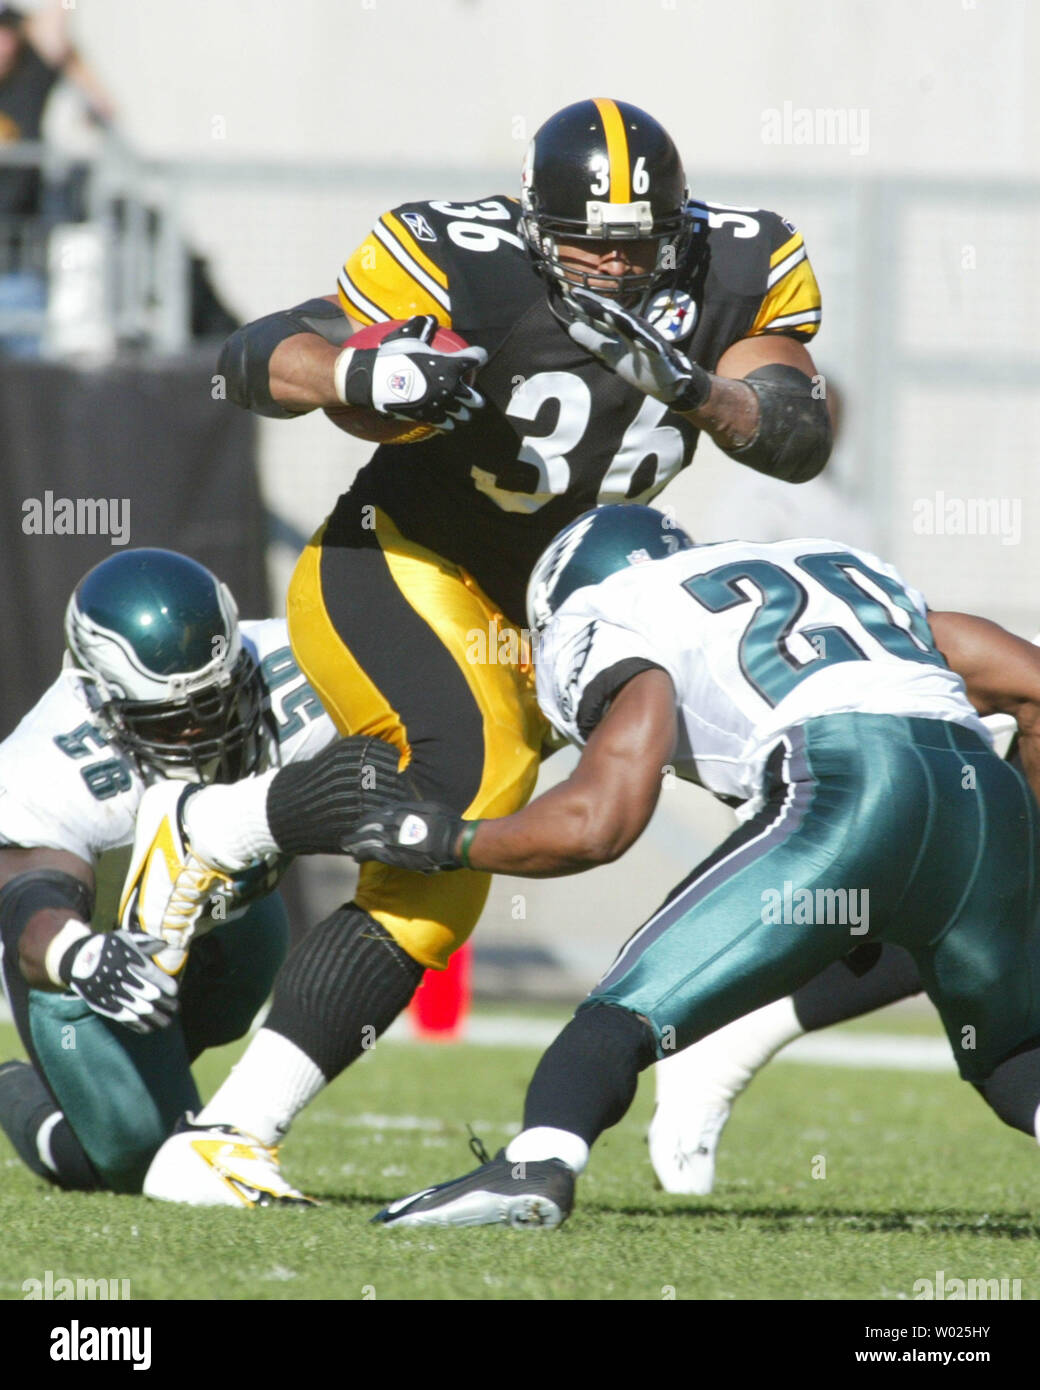 Pittsburgh Steelers Hines Jerome Bettis runs for a first down against the Philadelphia Eagles in the first quarter on November 7, 2004 at Heinz Field in Pittsburgh, Pennsylvania. On the play for the Eagles was Derrick (56) and Brian Dawkins (20) The Steelers lead the Eagles 21 to 3 at halftime. (UPI Photo/Stephen Gross) Stock Photo